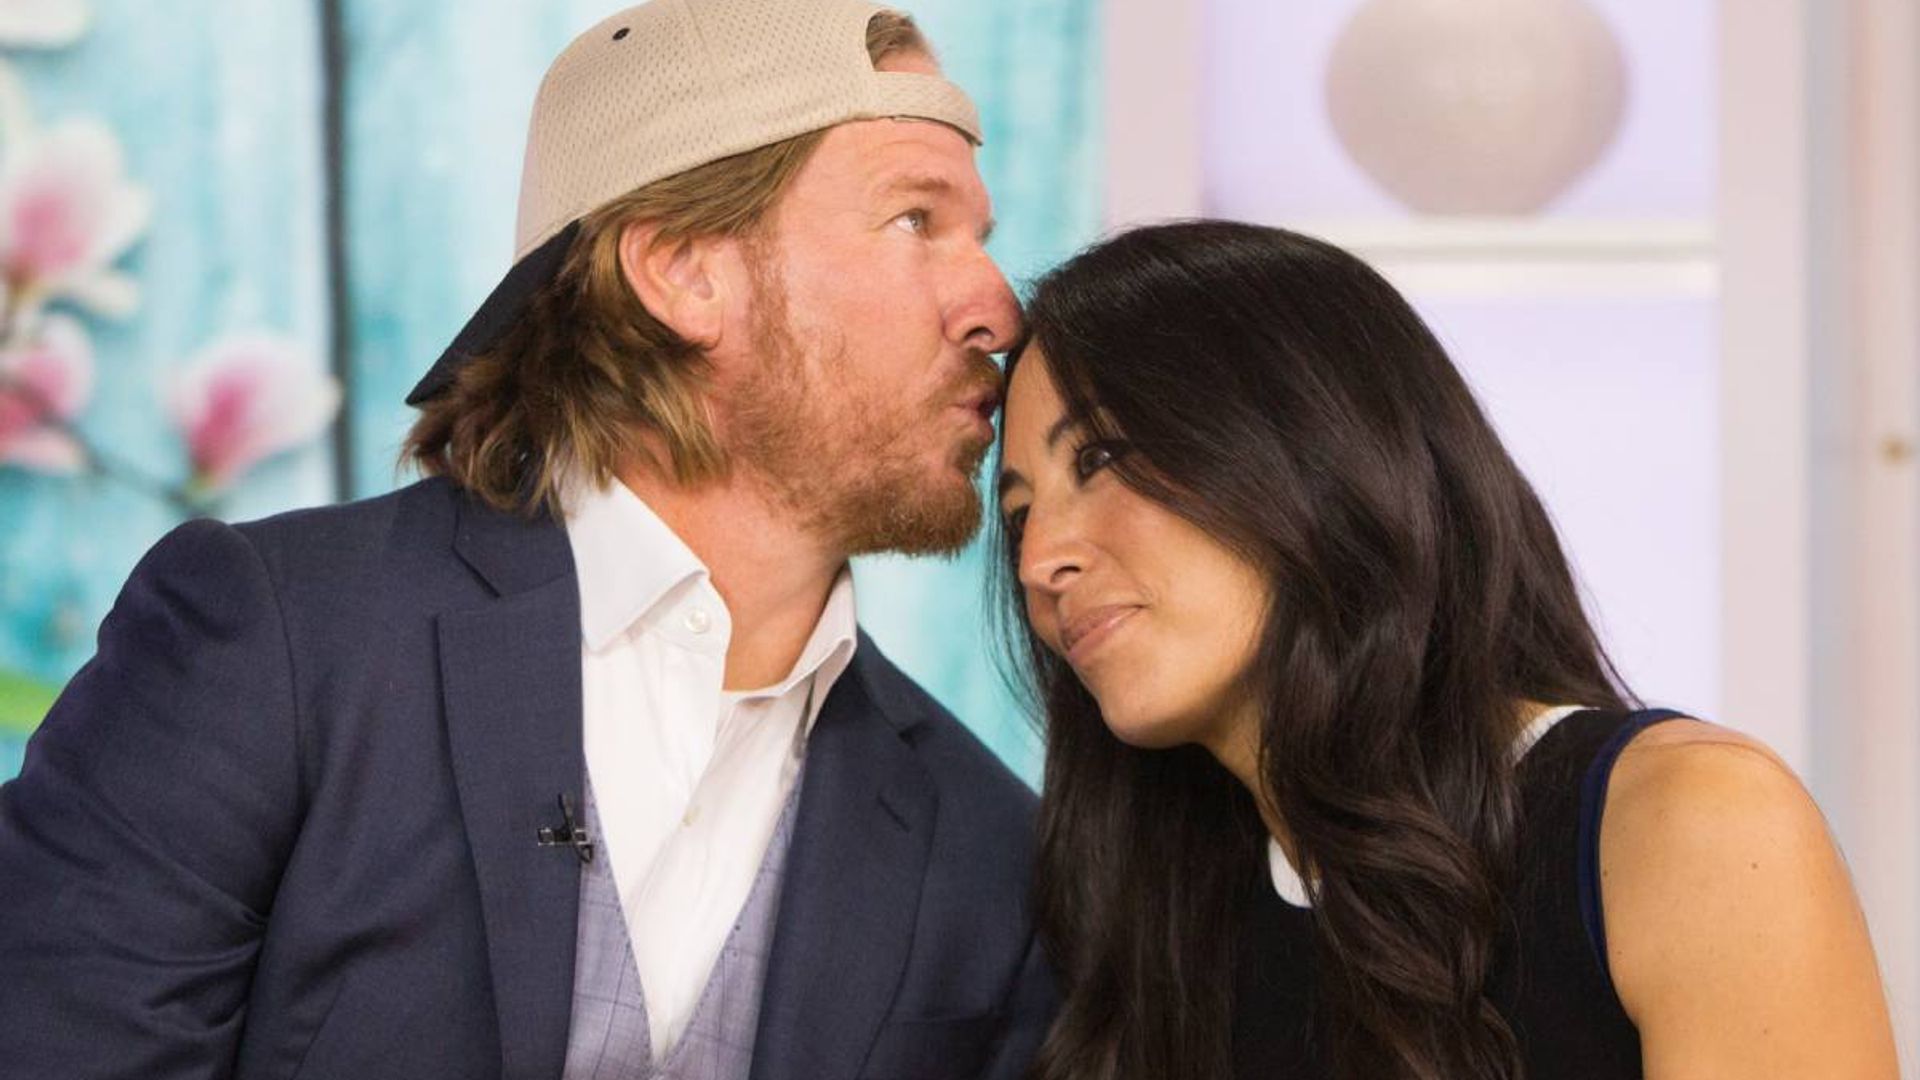 joanna gaines reveals plans to change life